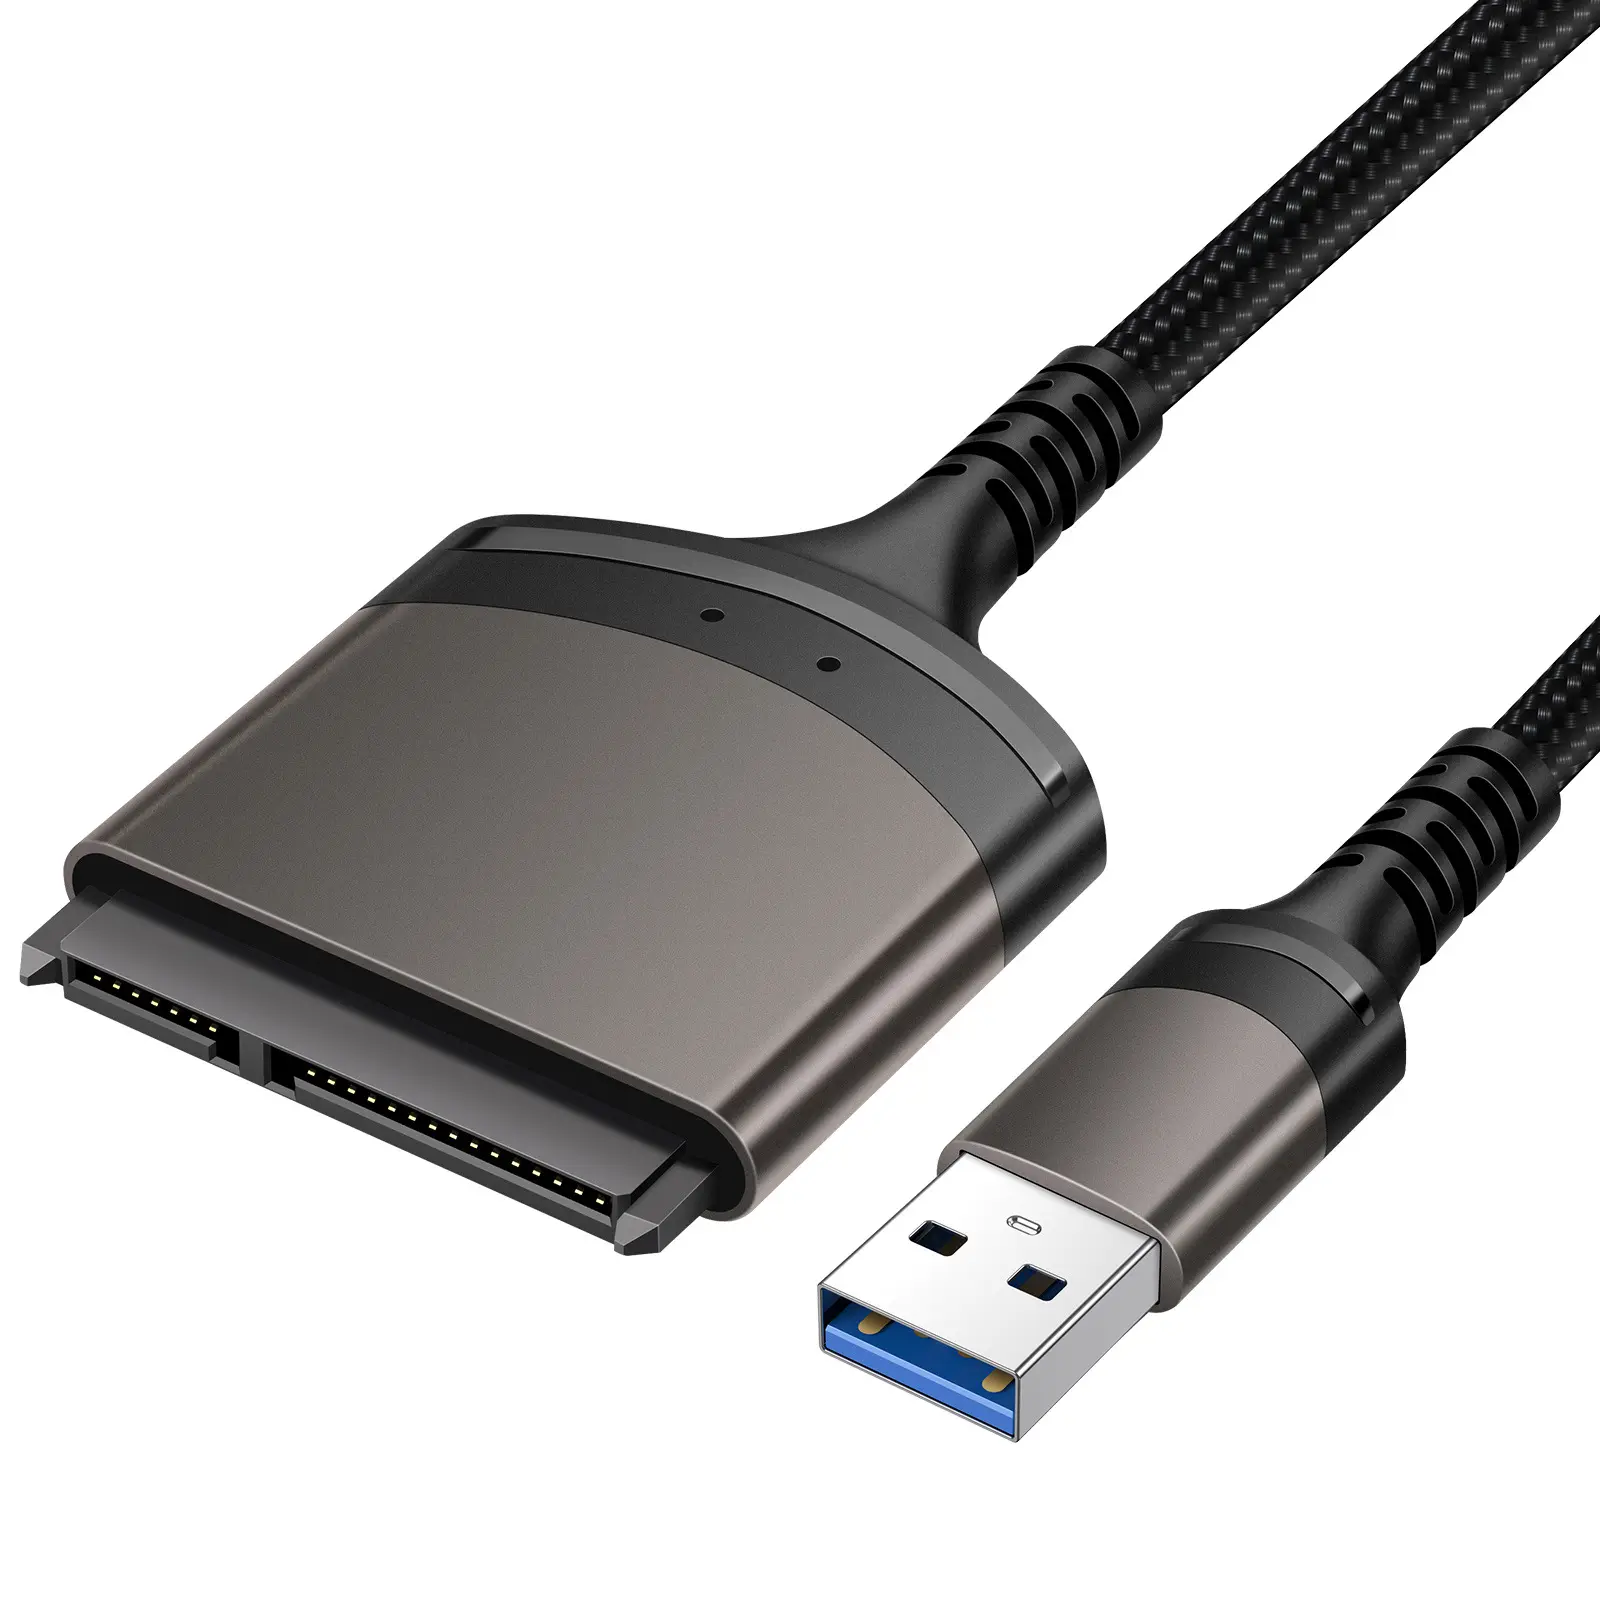 USB3.0 to SATA easy drive line serial hard drive 2.5 inch mobile hard drive transfer cable USB aluminum alloy shell